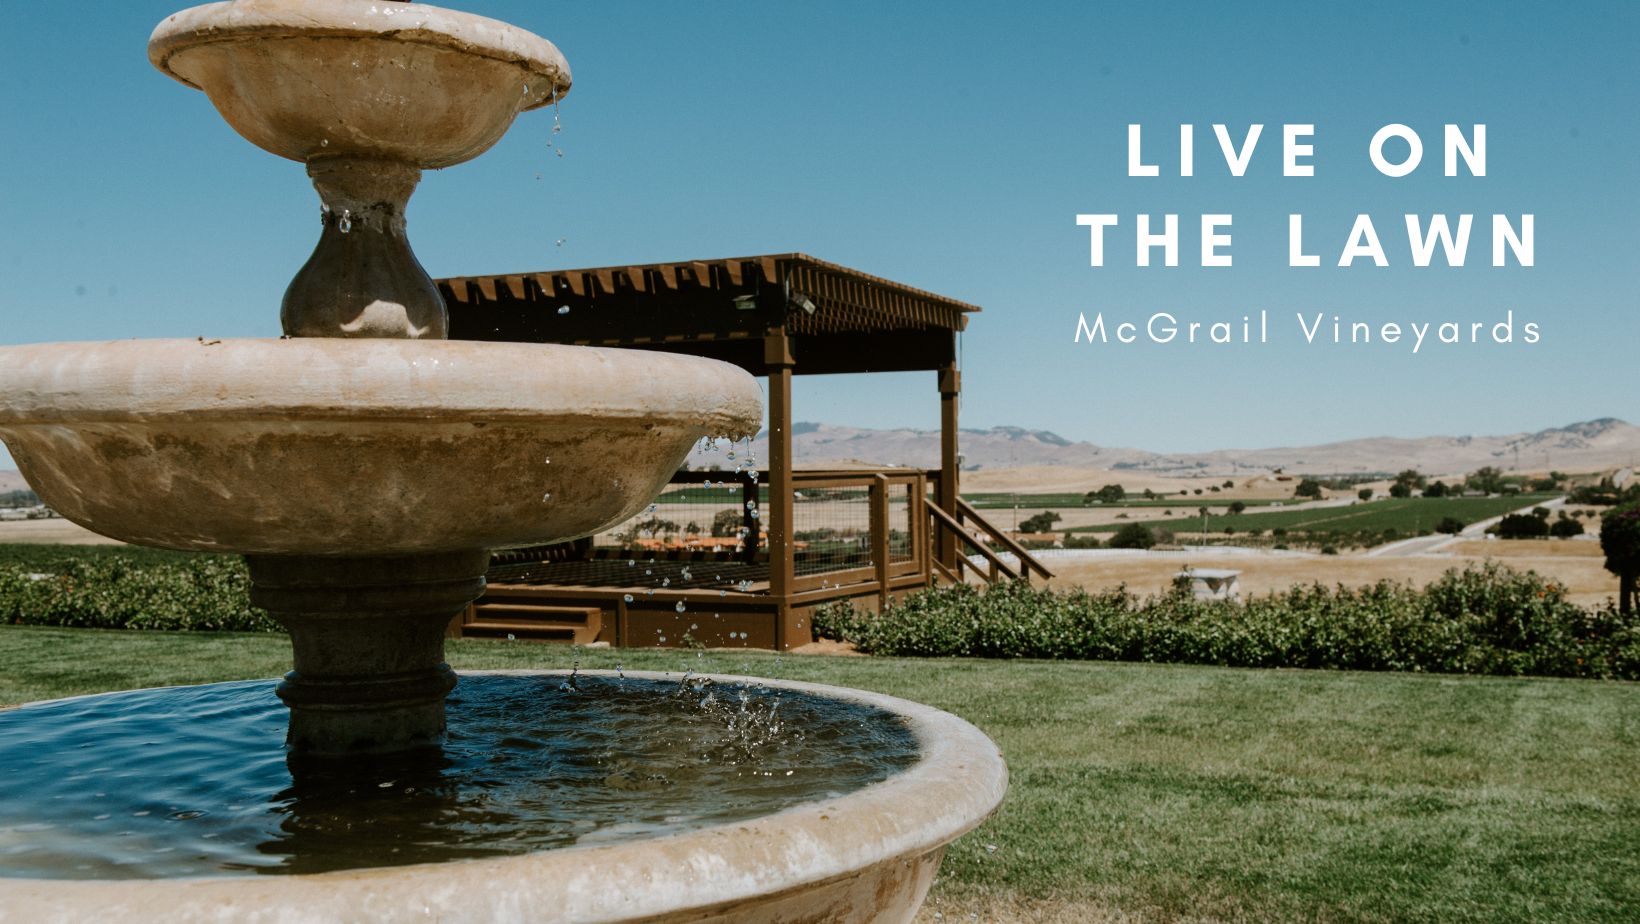 Live on the Lawn at McGrail Vineyards